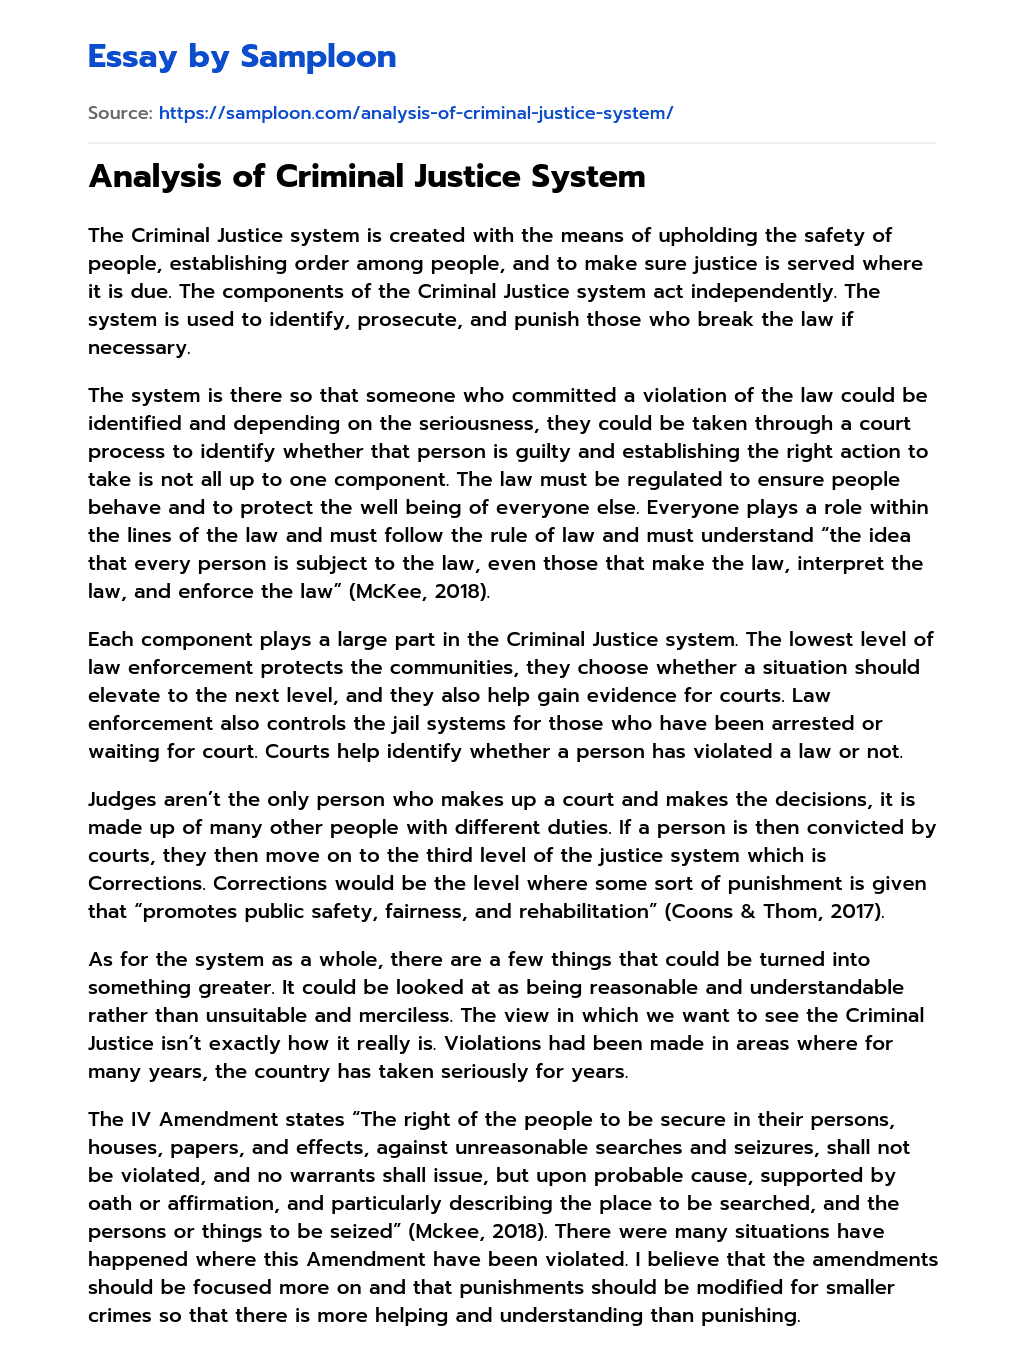 Analysis of Criminal Justice System essay